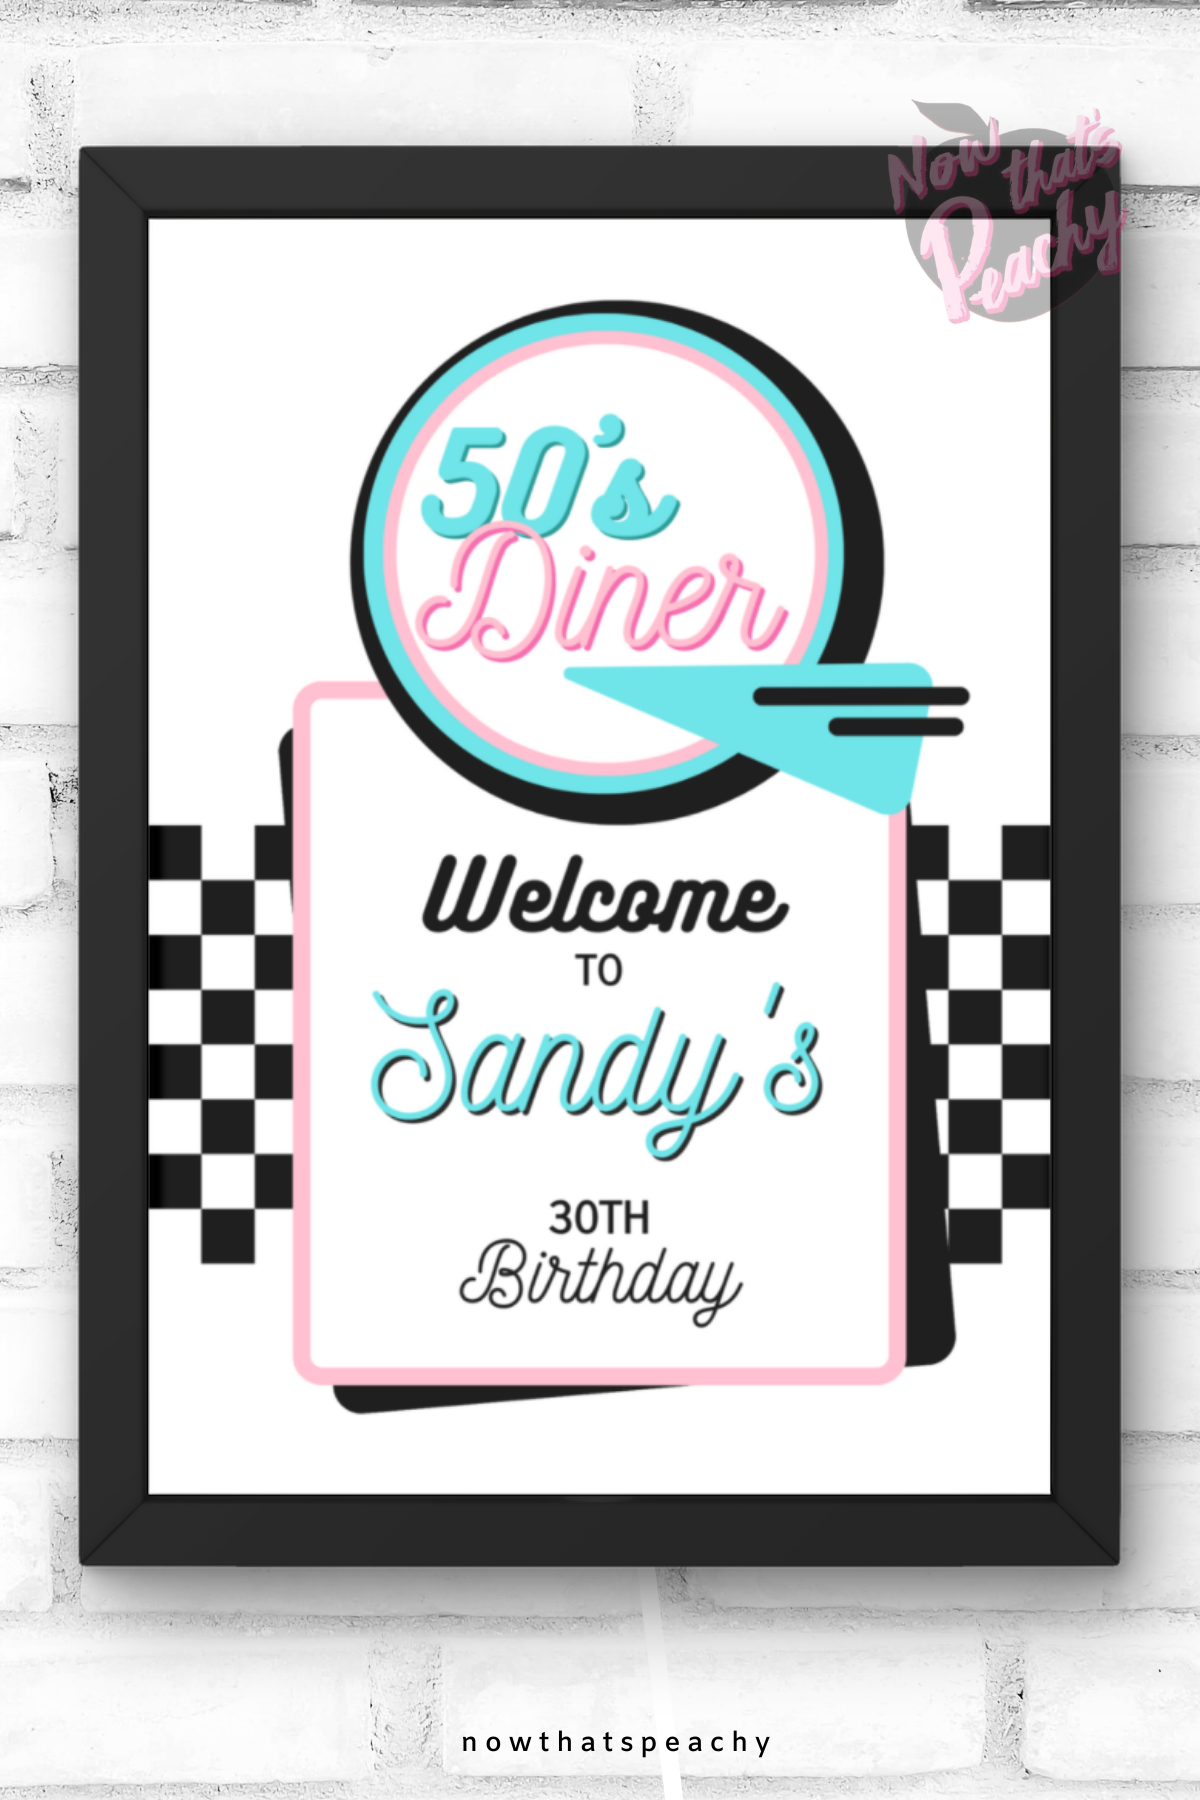 Personalized Welcome Sign Poster Diner, Grease, the 1950s, Soda Hop, Music, Retro or Rock'n'Roll  custom editable Welcome sign decorating instant Digital Download  Diner Soda Hop Welcome Template to Download edit  Print at home.  USE FOR  Birthday Parties 16th, 18th, 21st, 30th, 40th, 50th, 60th, 70th etc Birthday Themed Parties GREASE, The Fifties, Rock'n'Roll, Soda Hop, Greaser, Movies, Diner, Retro, Music etc Bachelorette Hens Parties Ladies,